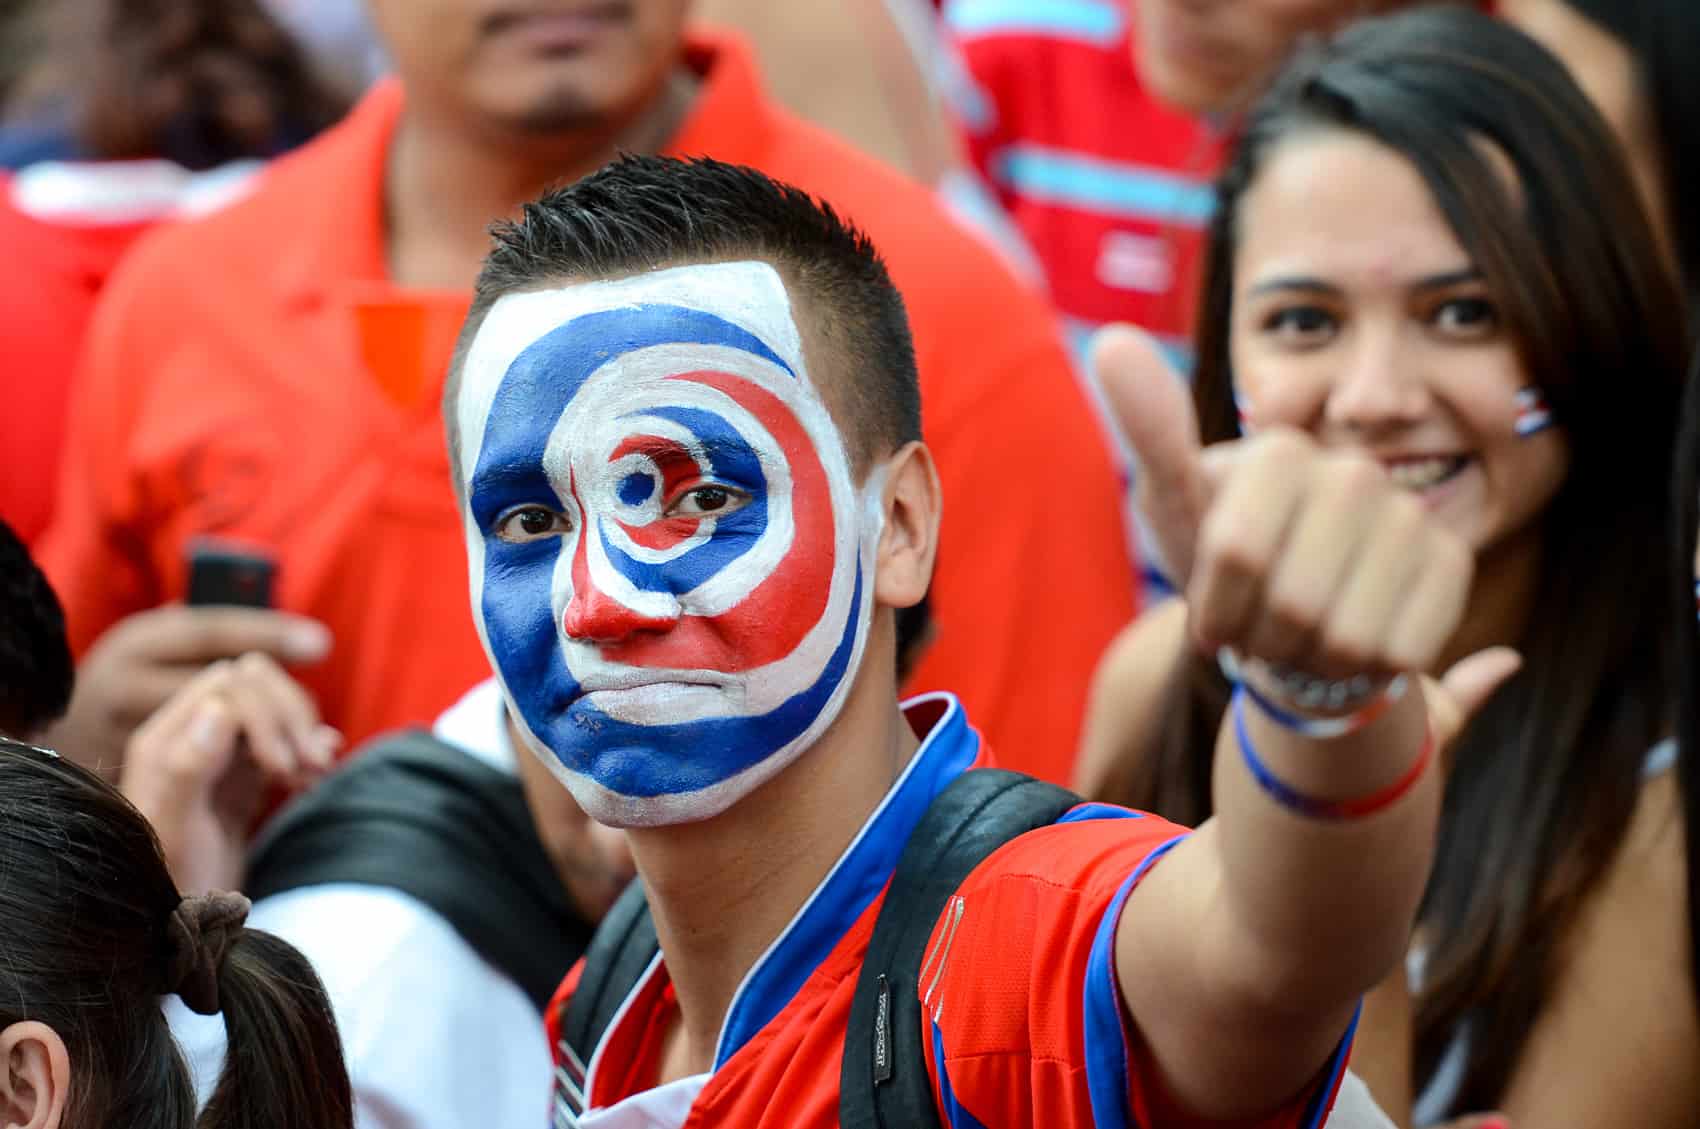 Costa Rica achieves highest FIFA ranking ever (No. 16) after historic